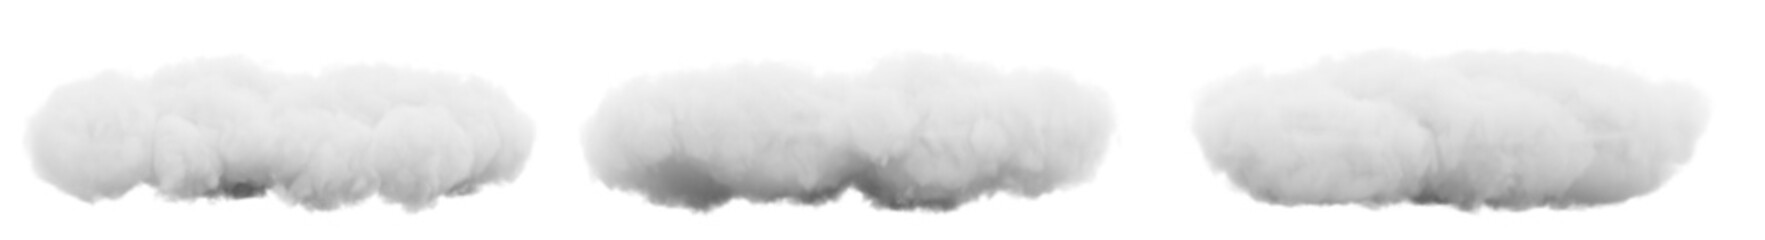 Cumulus and fluffy cloud shape with isolated on transparent background - PNG file, 3D rendering illustration, Clip art, cut out and sky elements